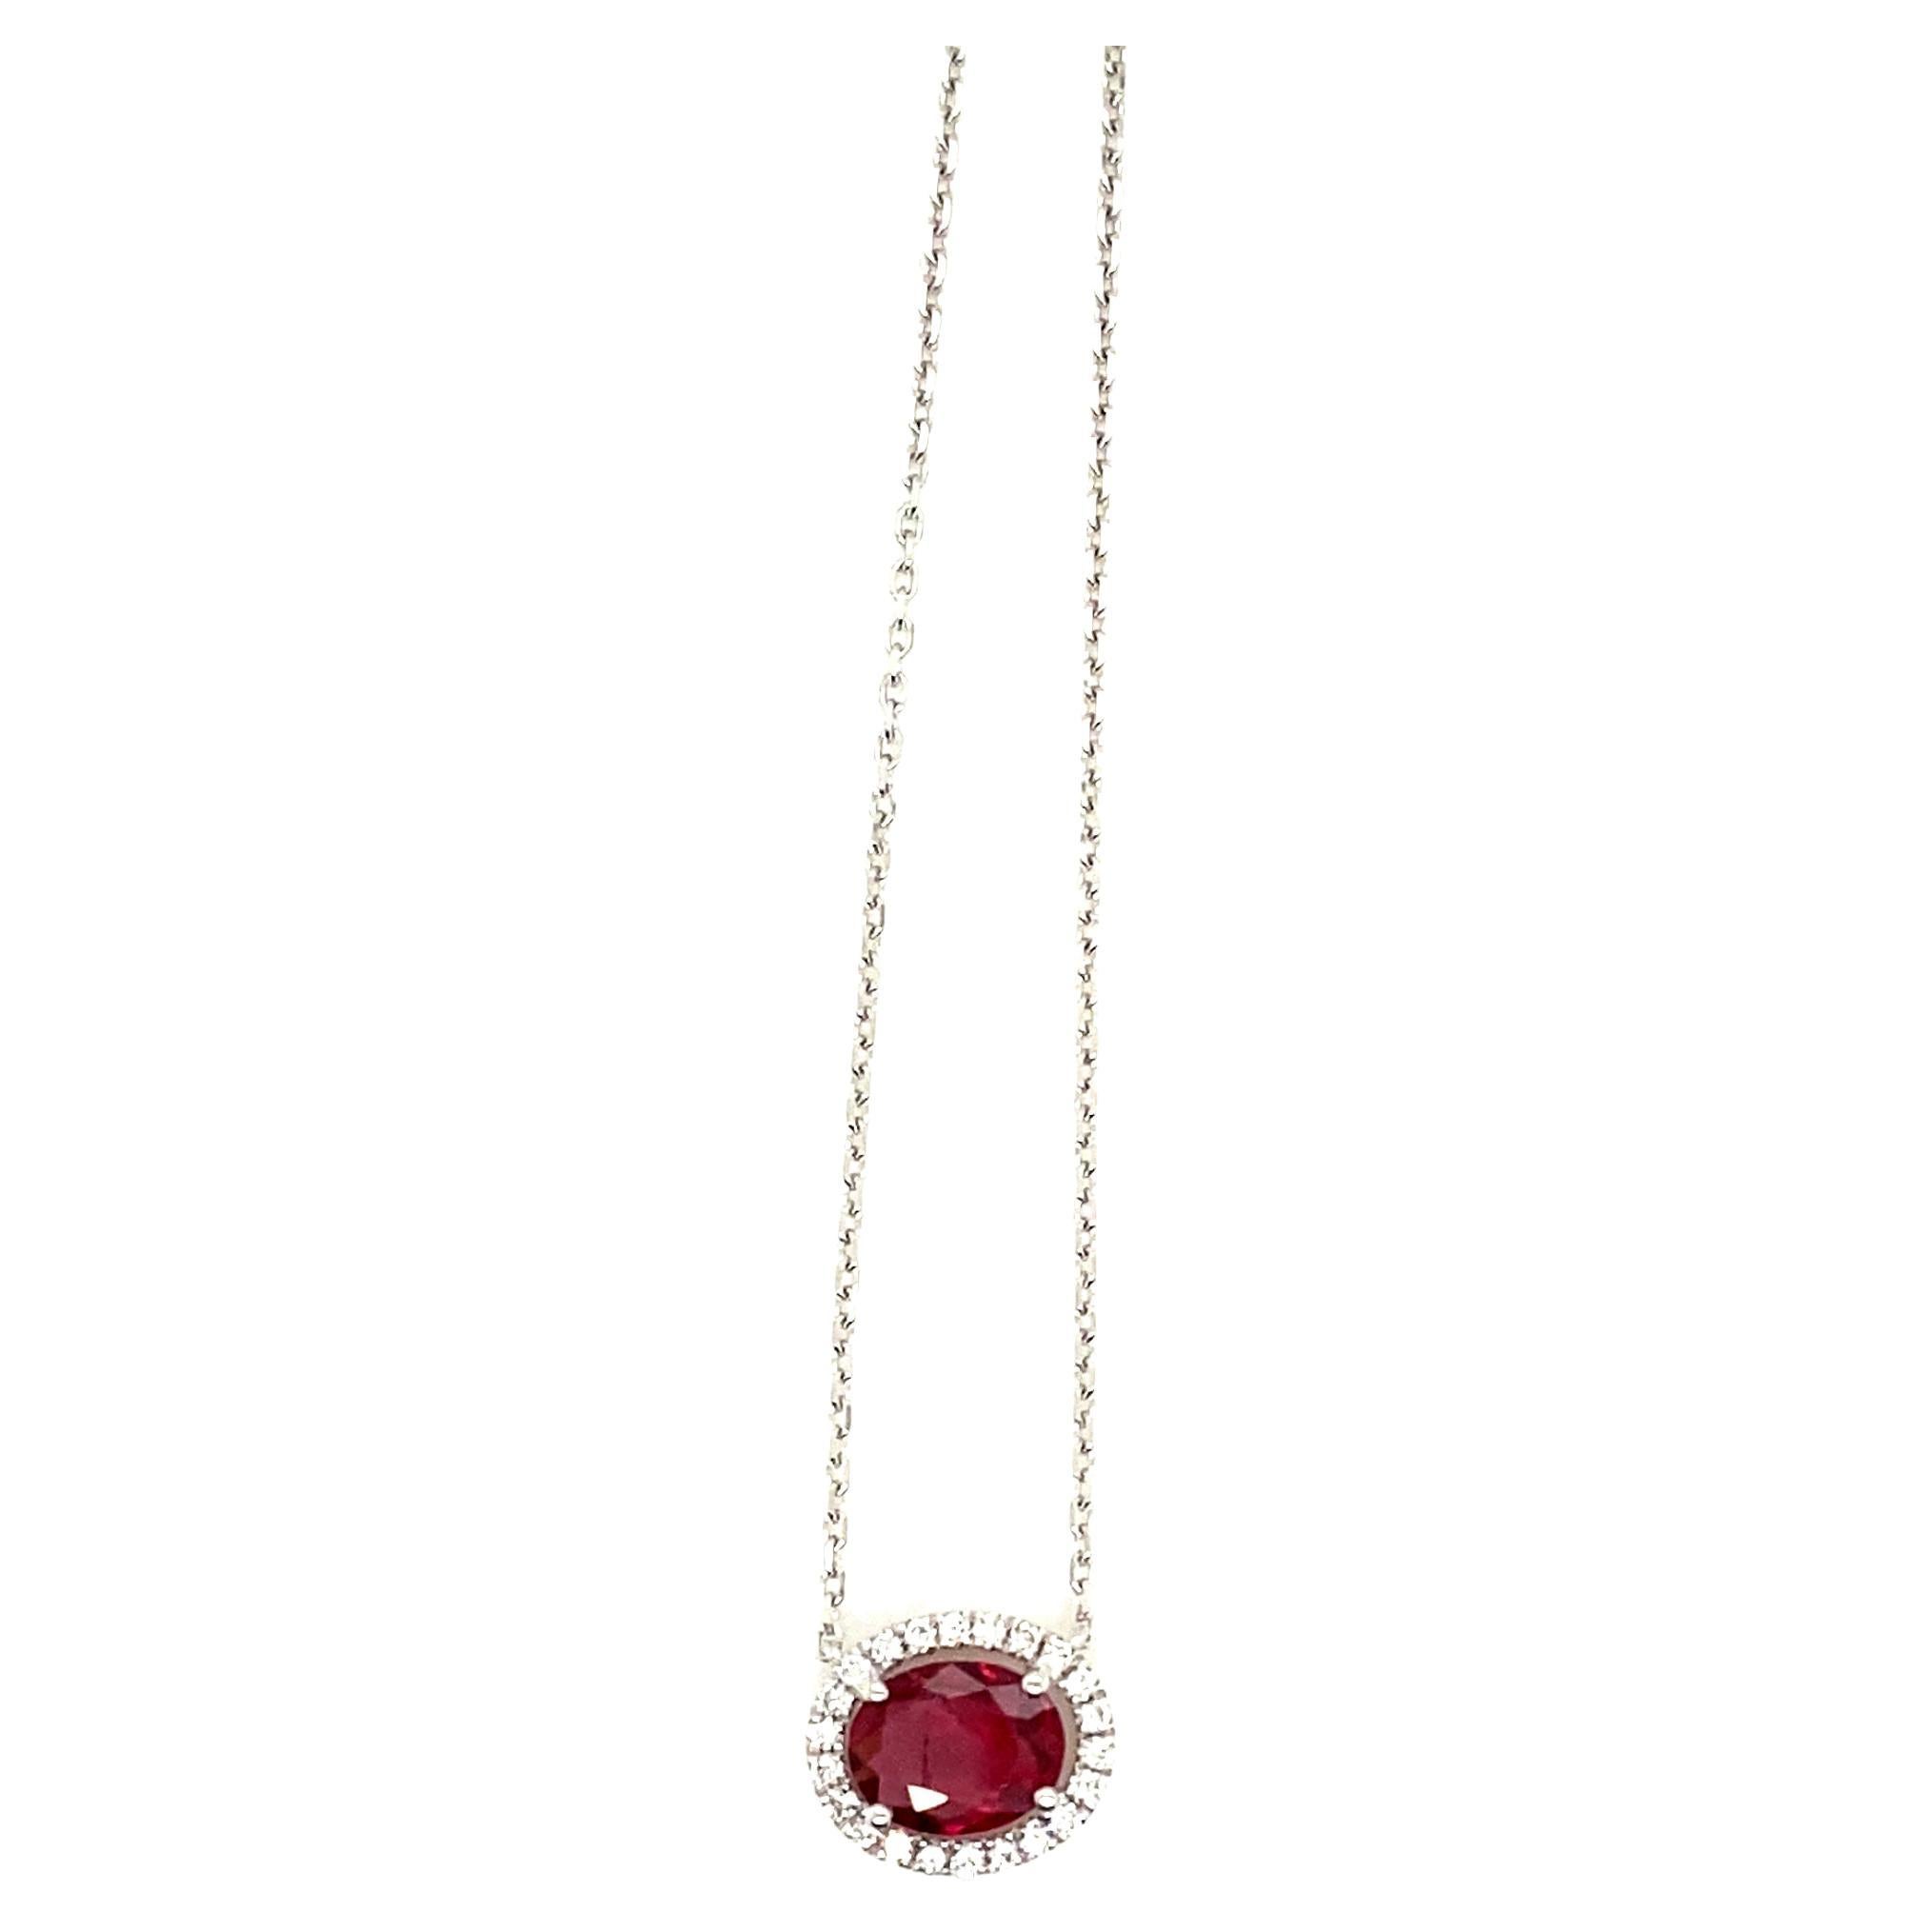 1.16 Carat Oval-Cut Intense Red Ruby and White Diamond Pendant Necklace For Sale